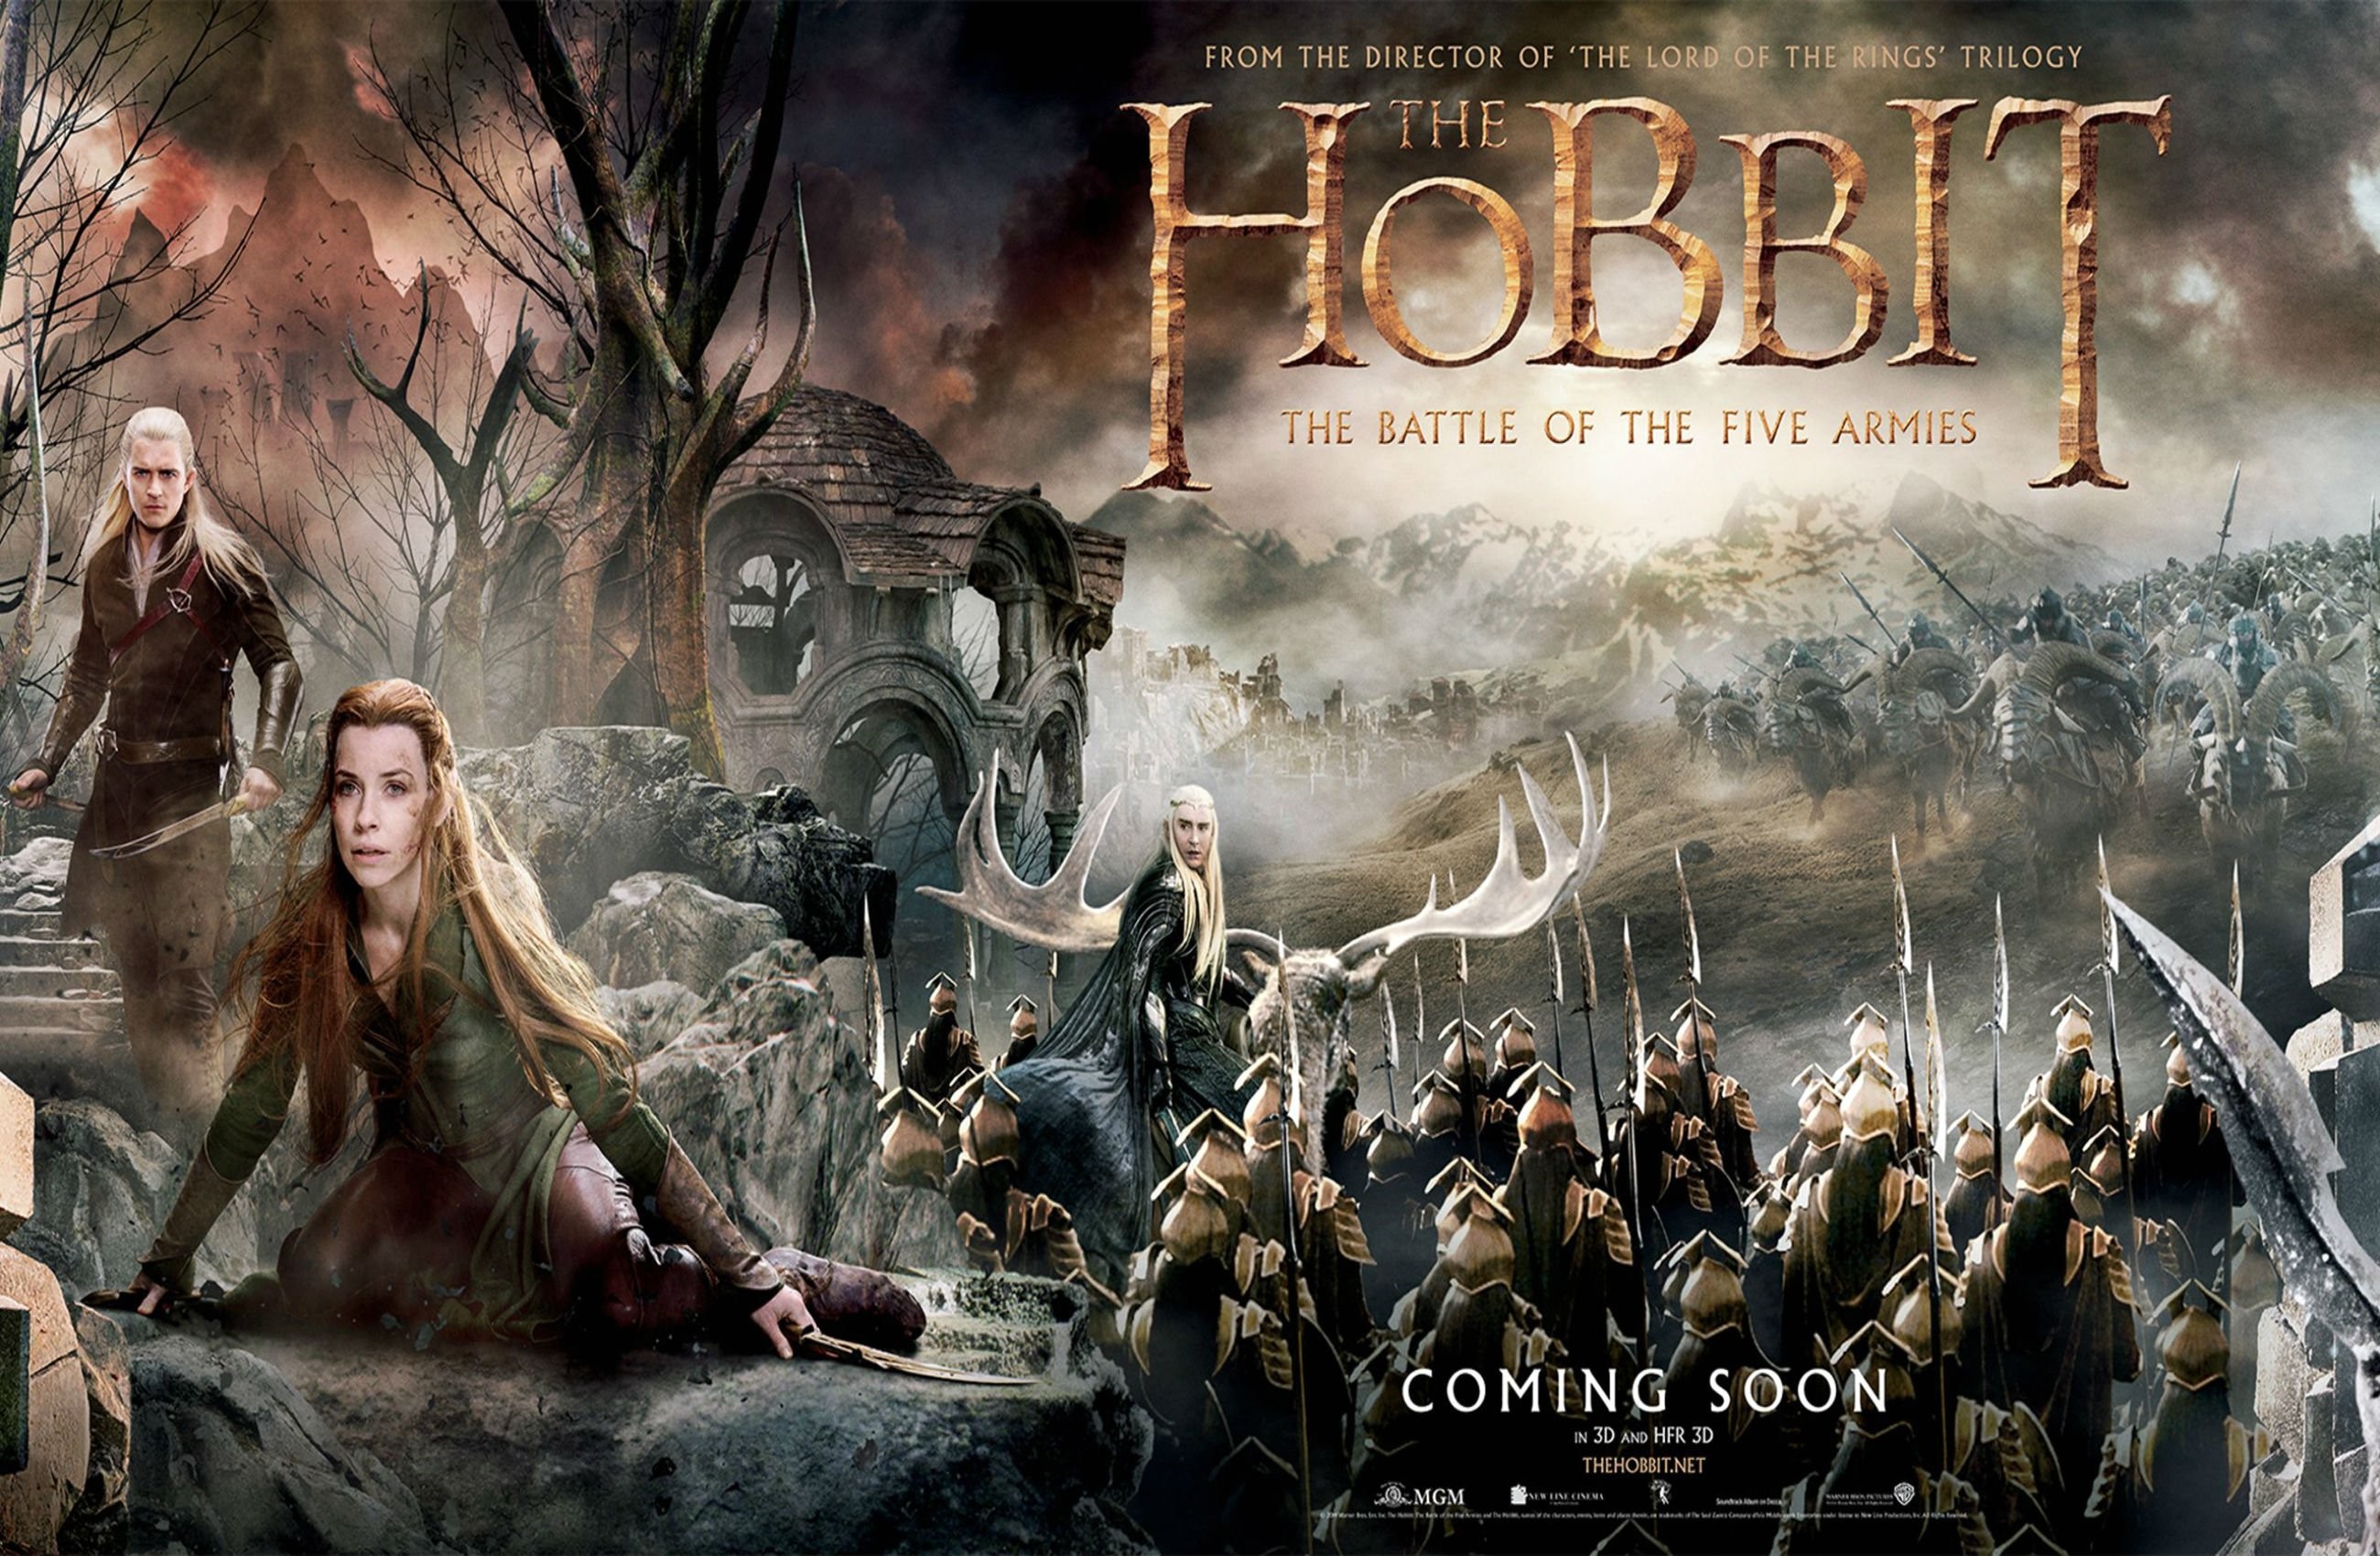 the hobbit the battle of the five armies wallpaper hd